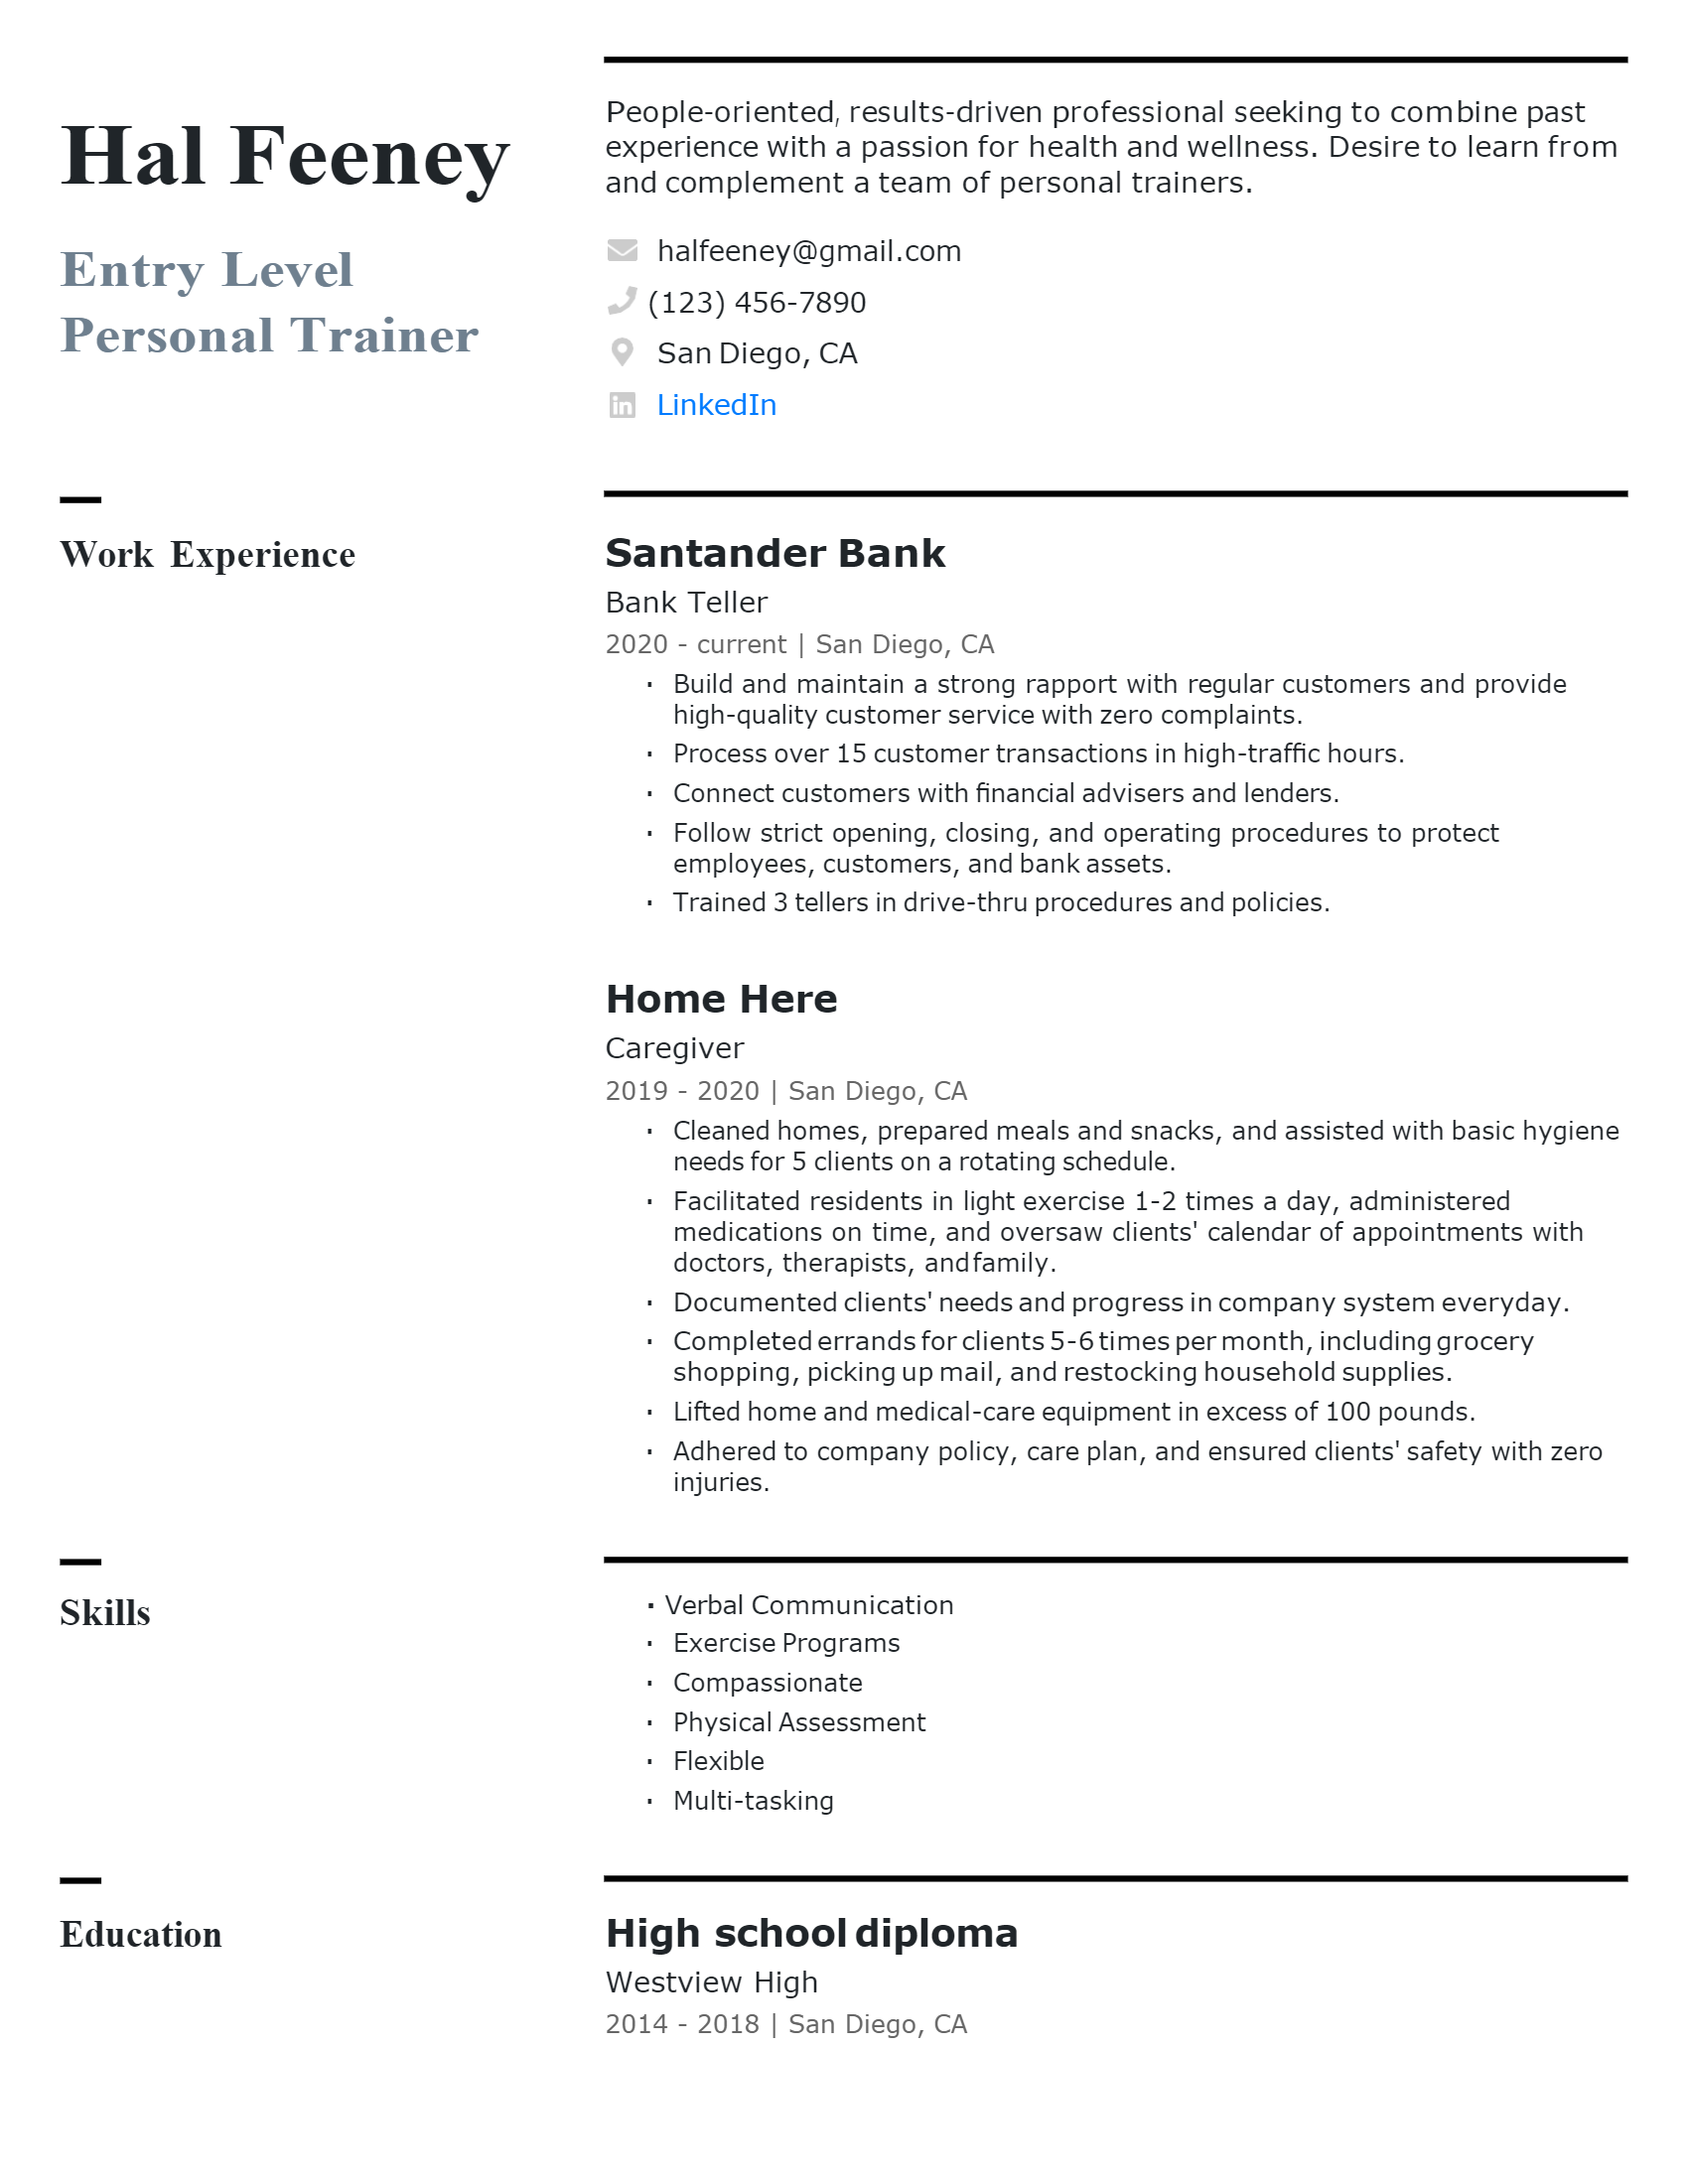 resume help for new personal fitness trainer with no experience